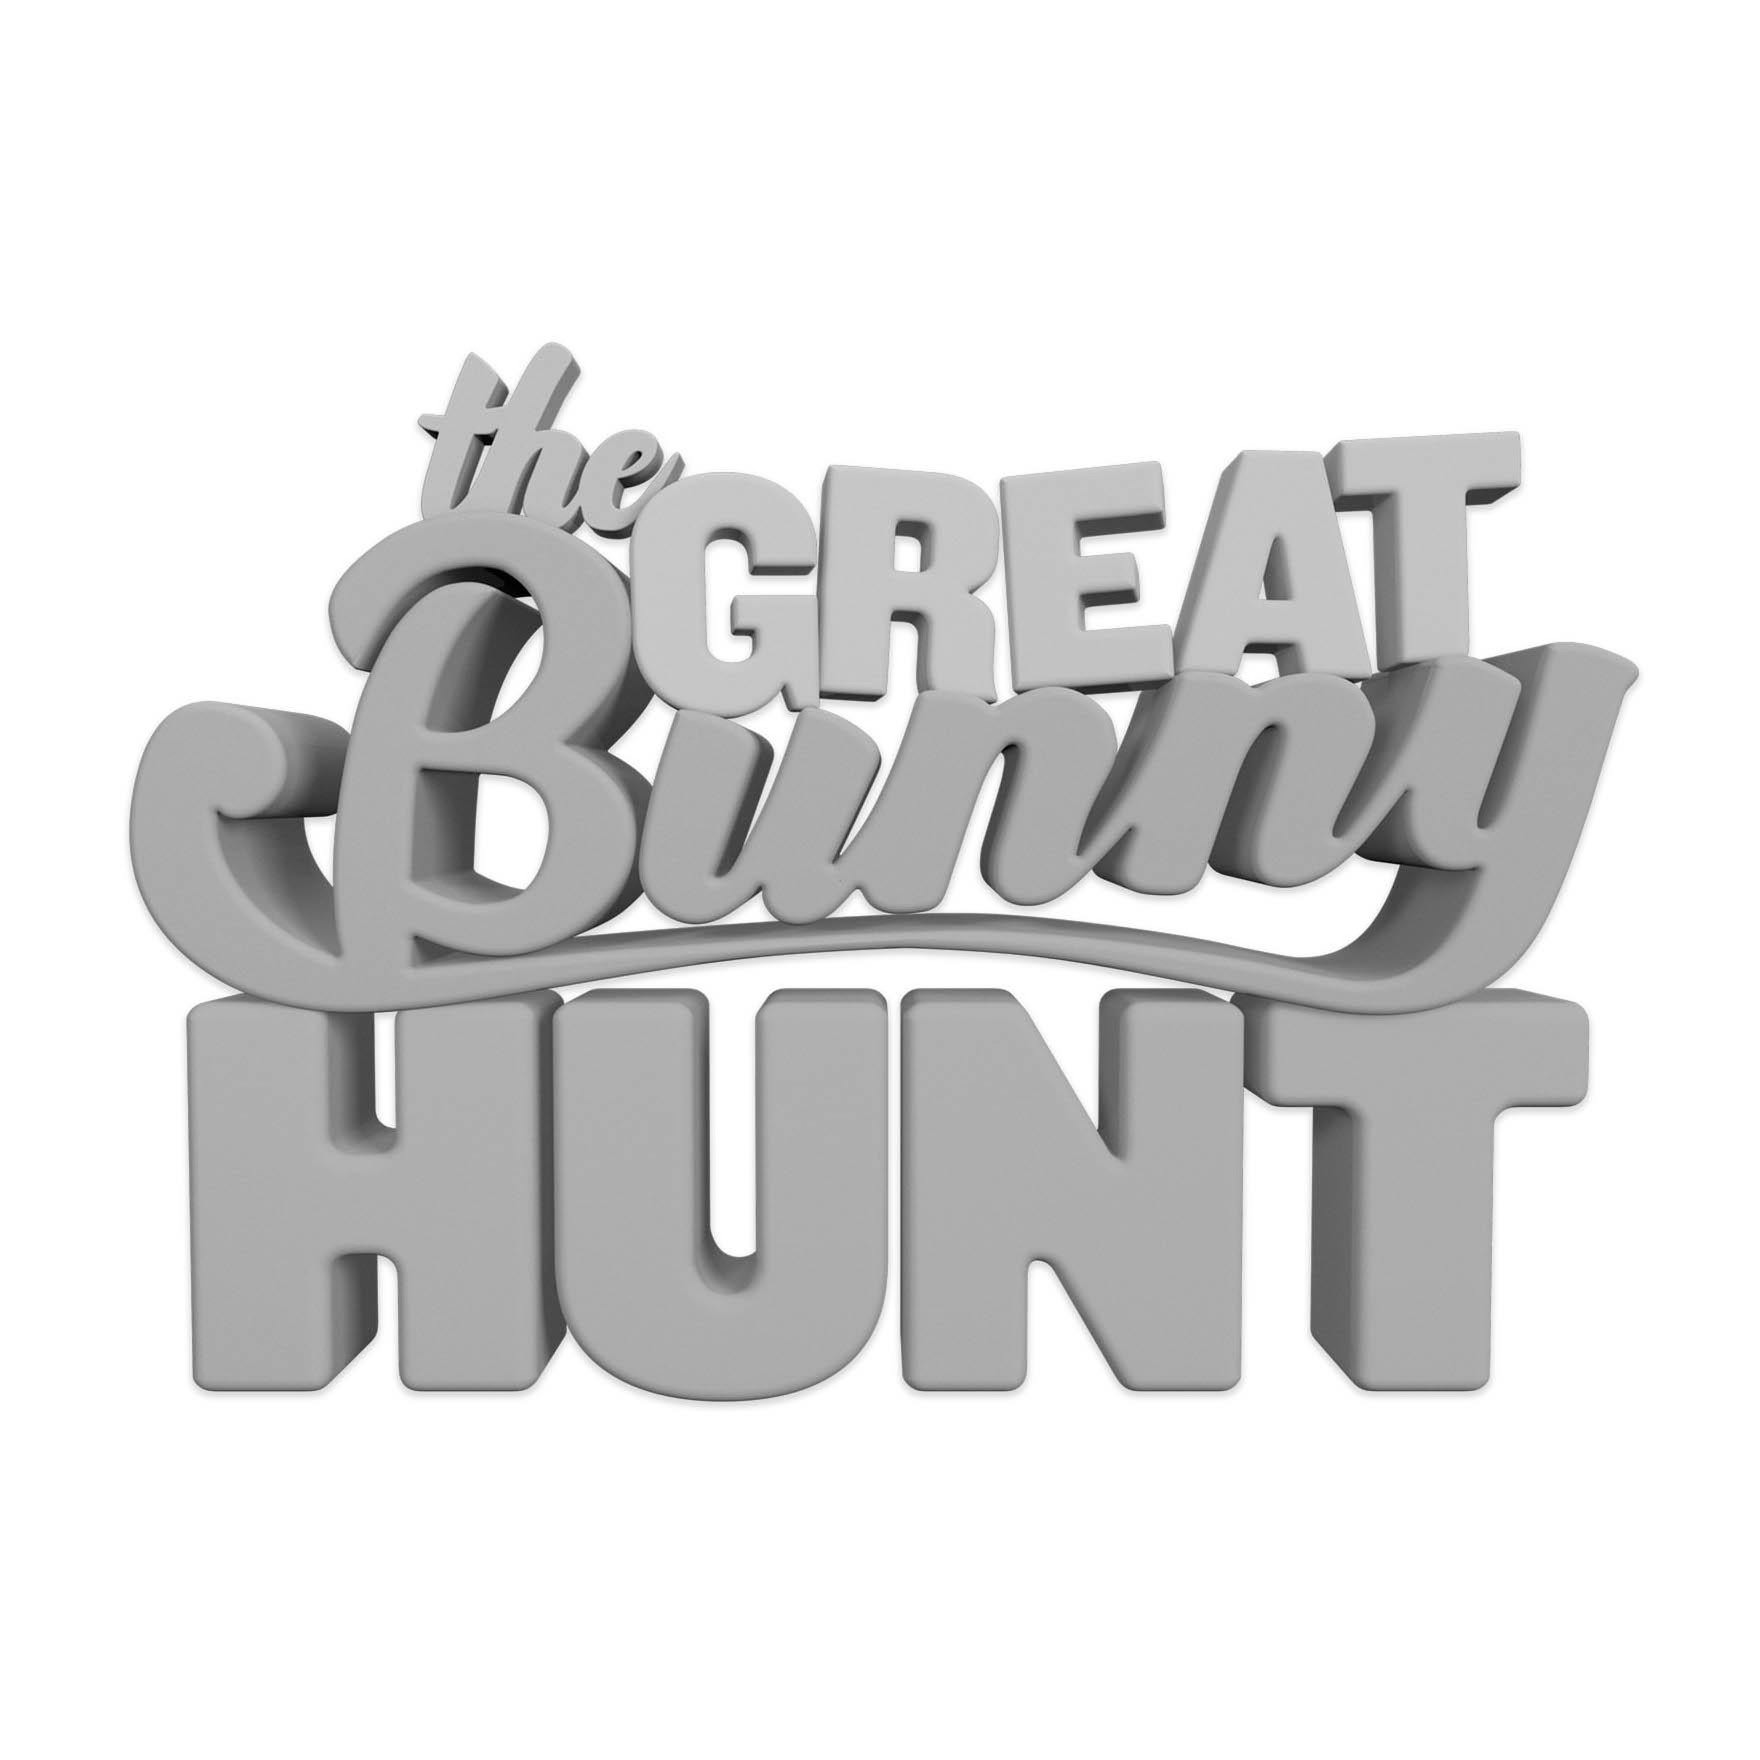  THE GREAT BUNNY HUNT